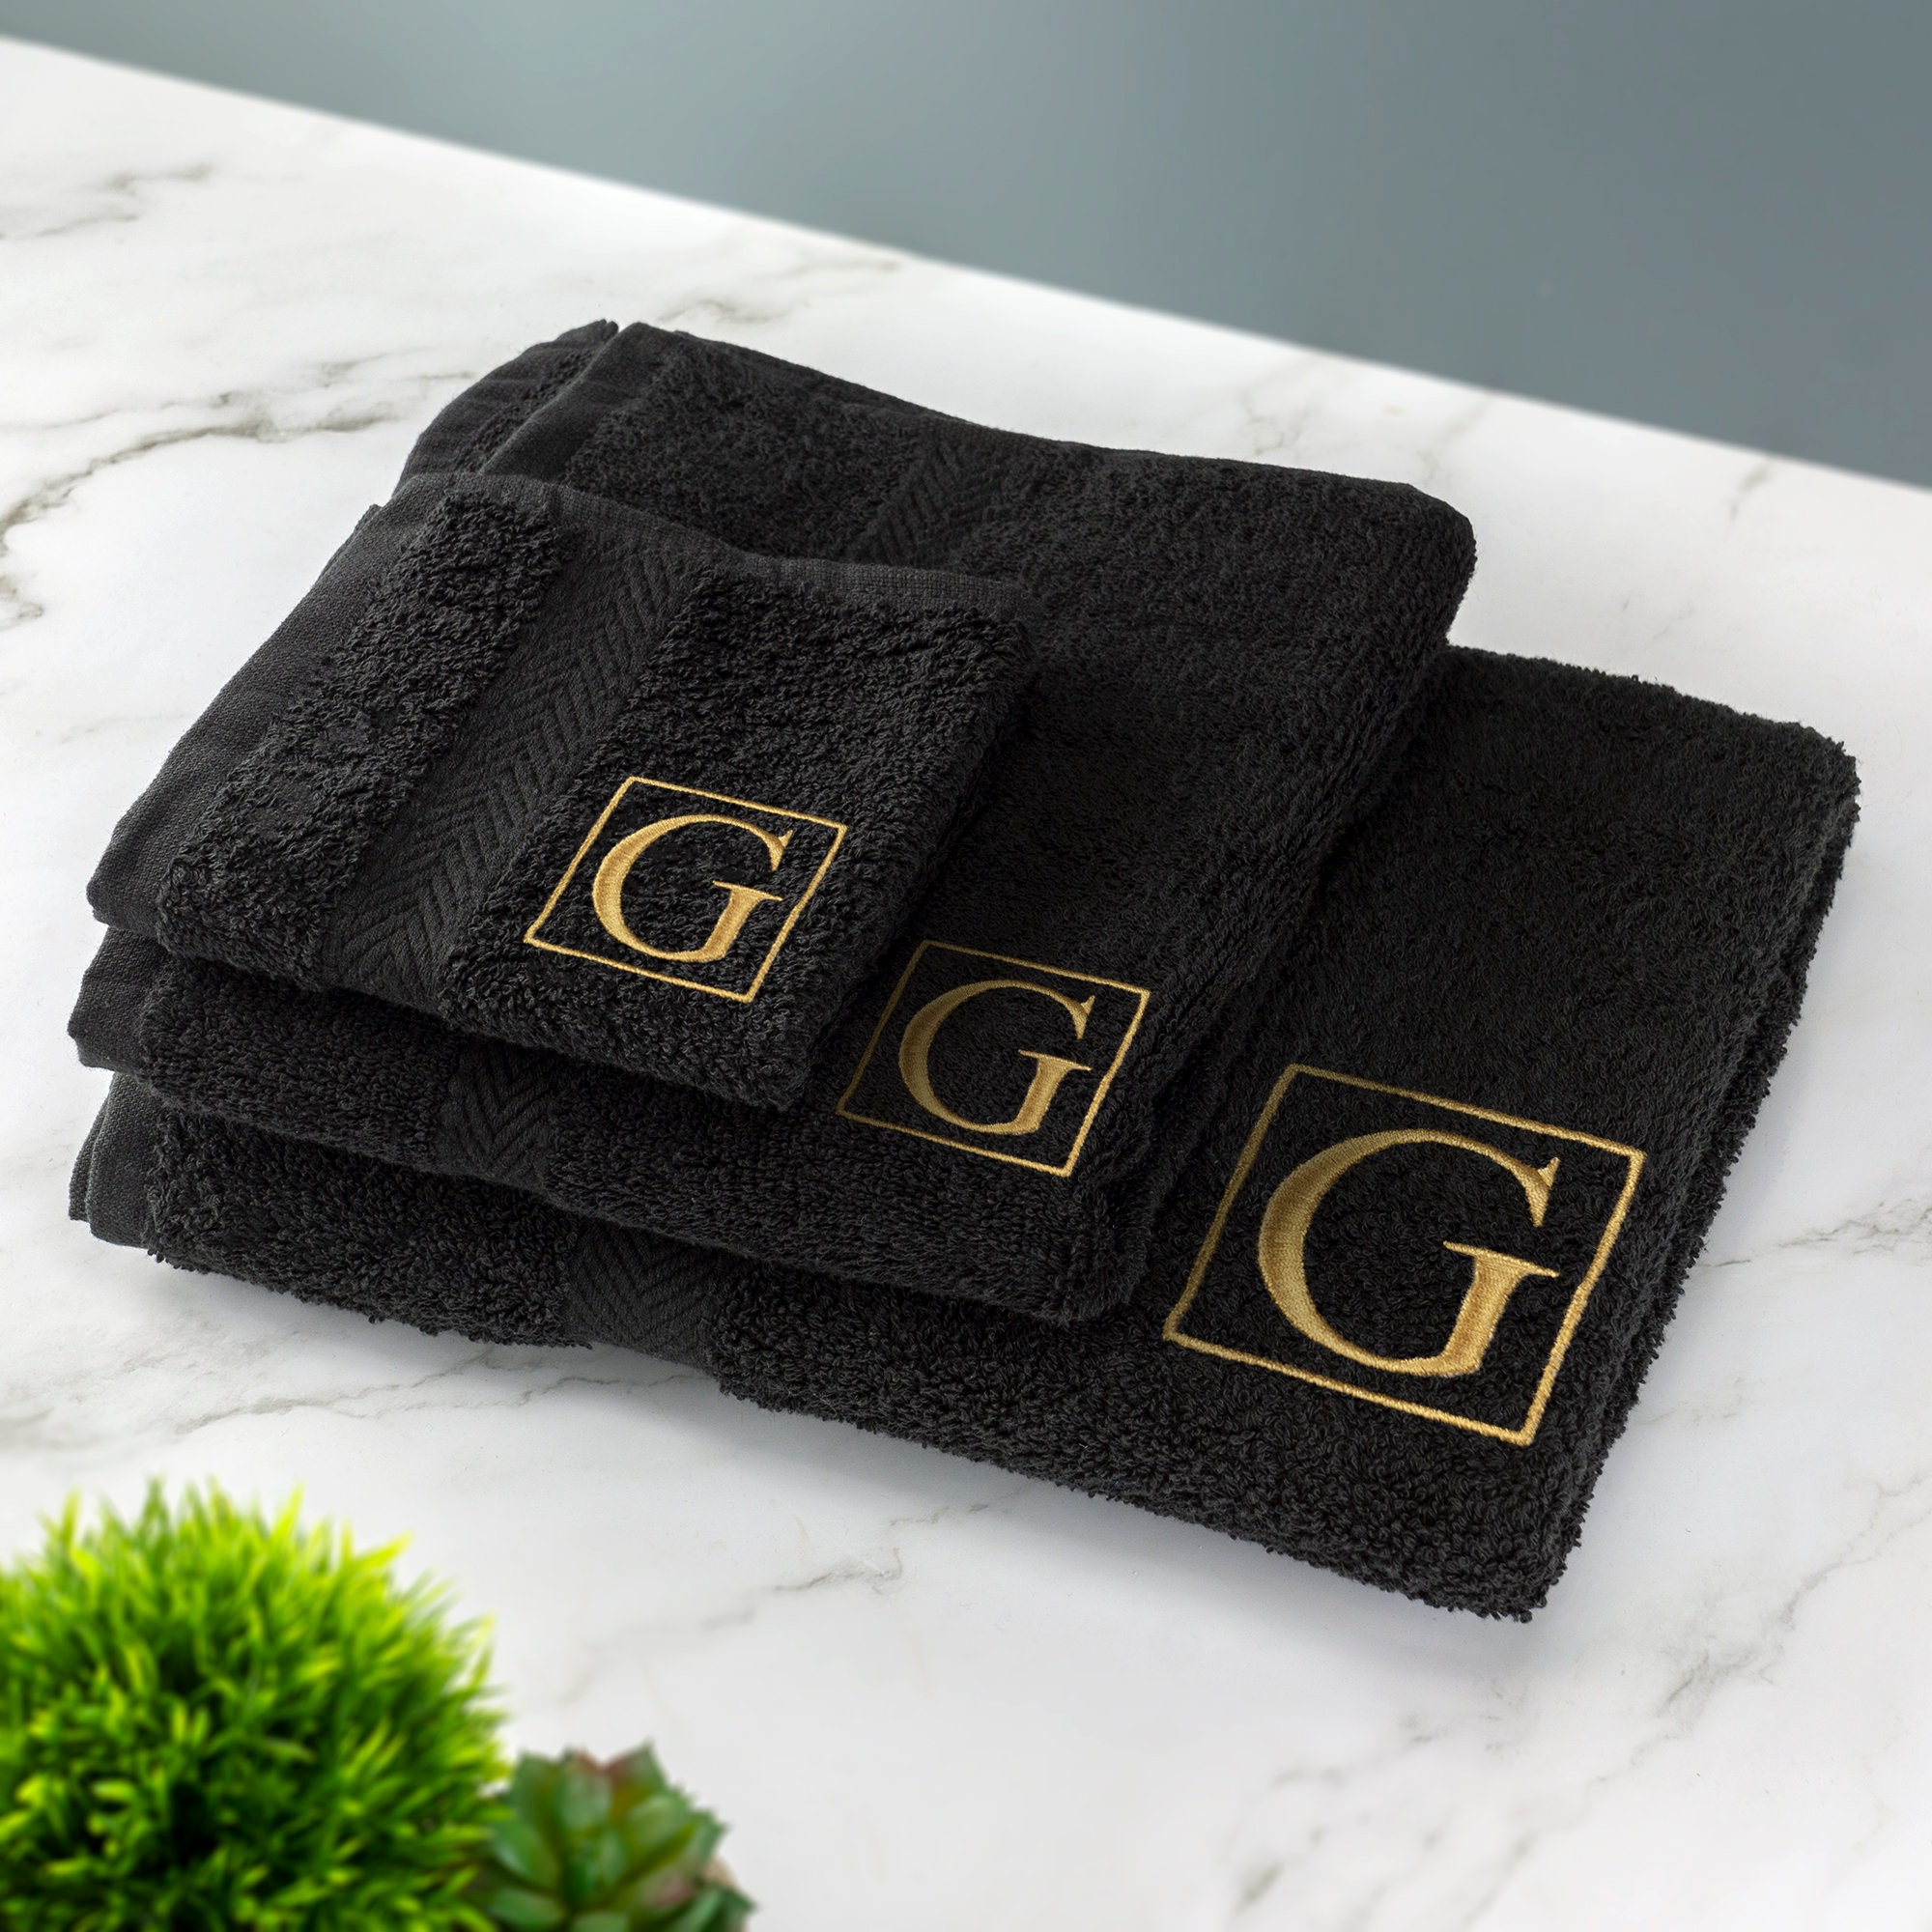 Personalised Embroidered Towels Custom Bath Hand Facecloth 